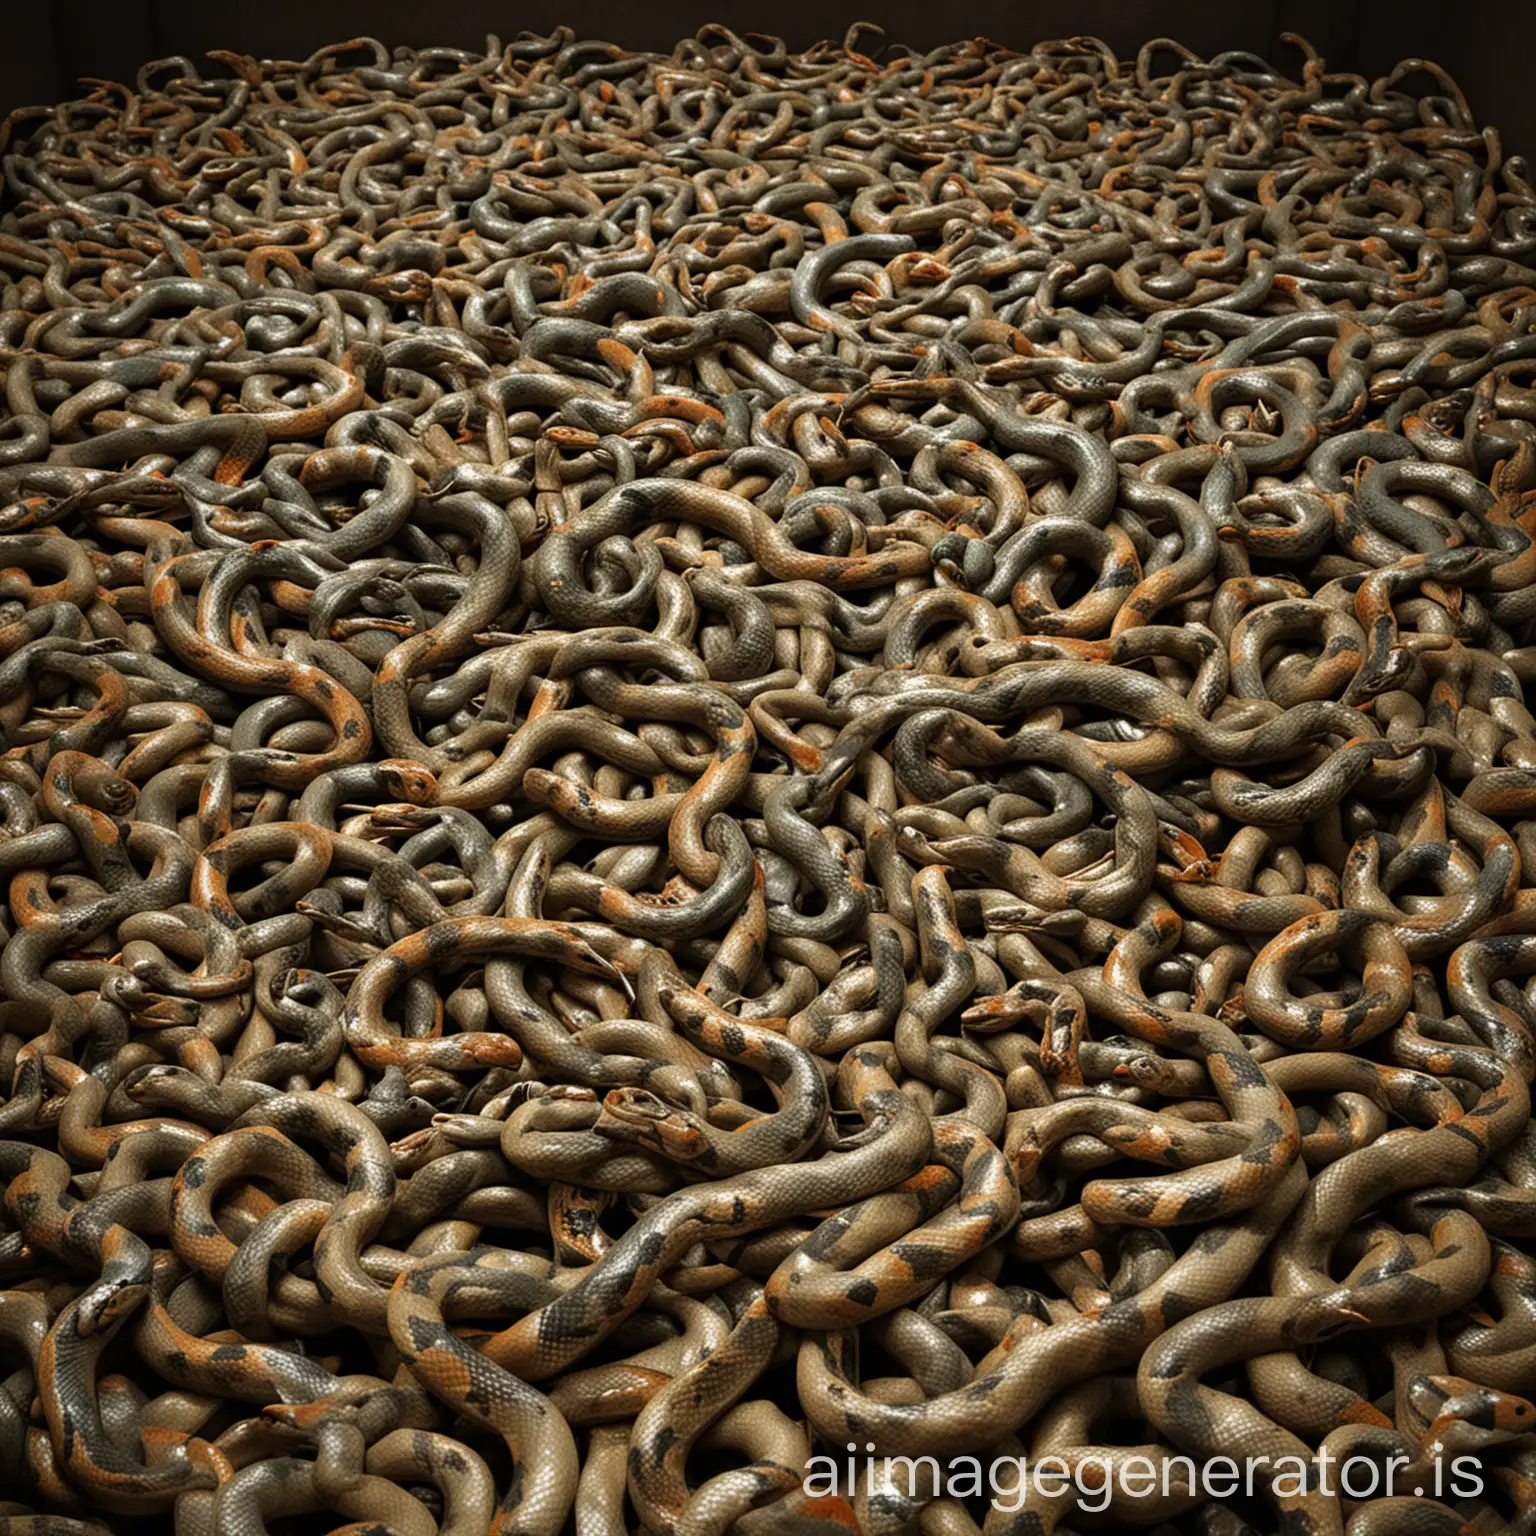 100 snakes trapped 3d pictures human